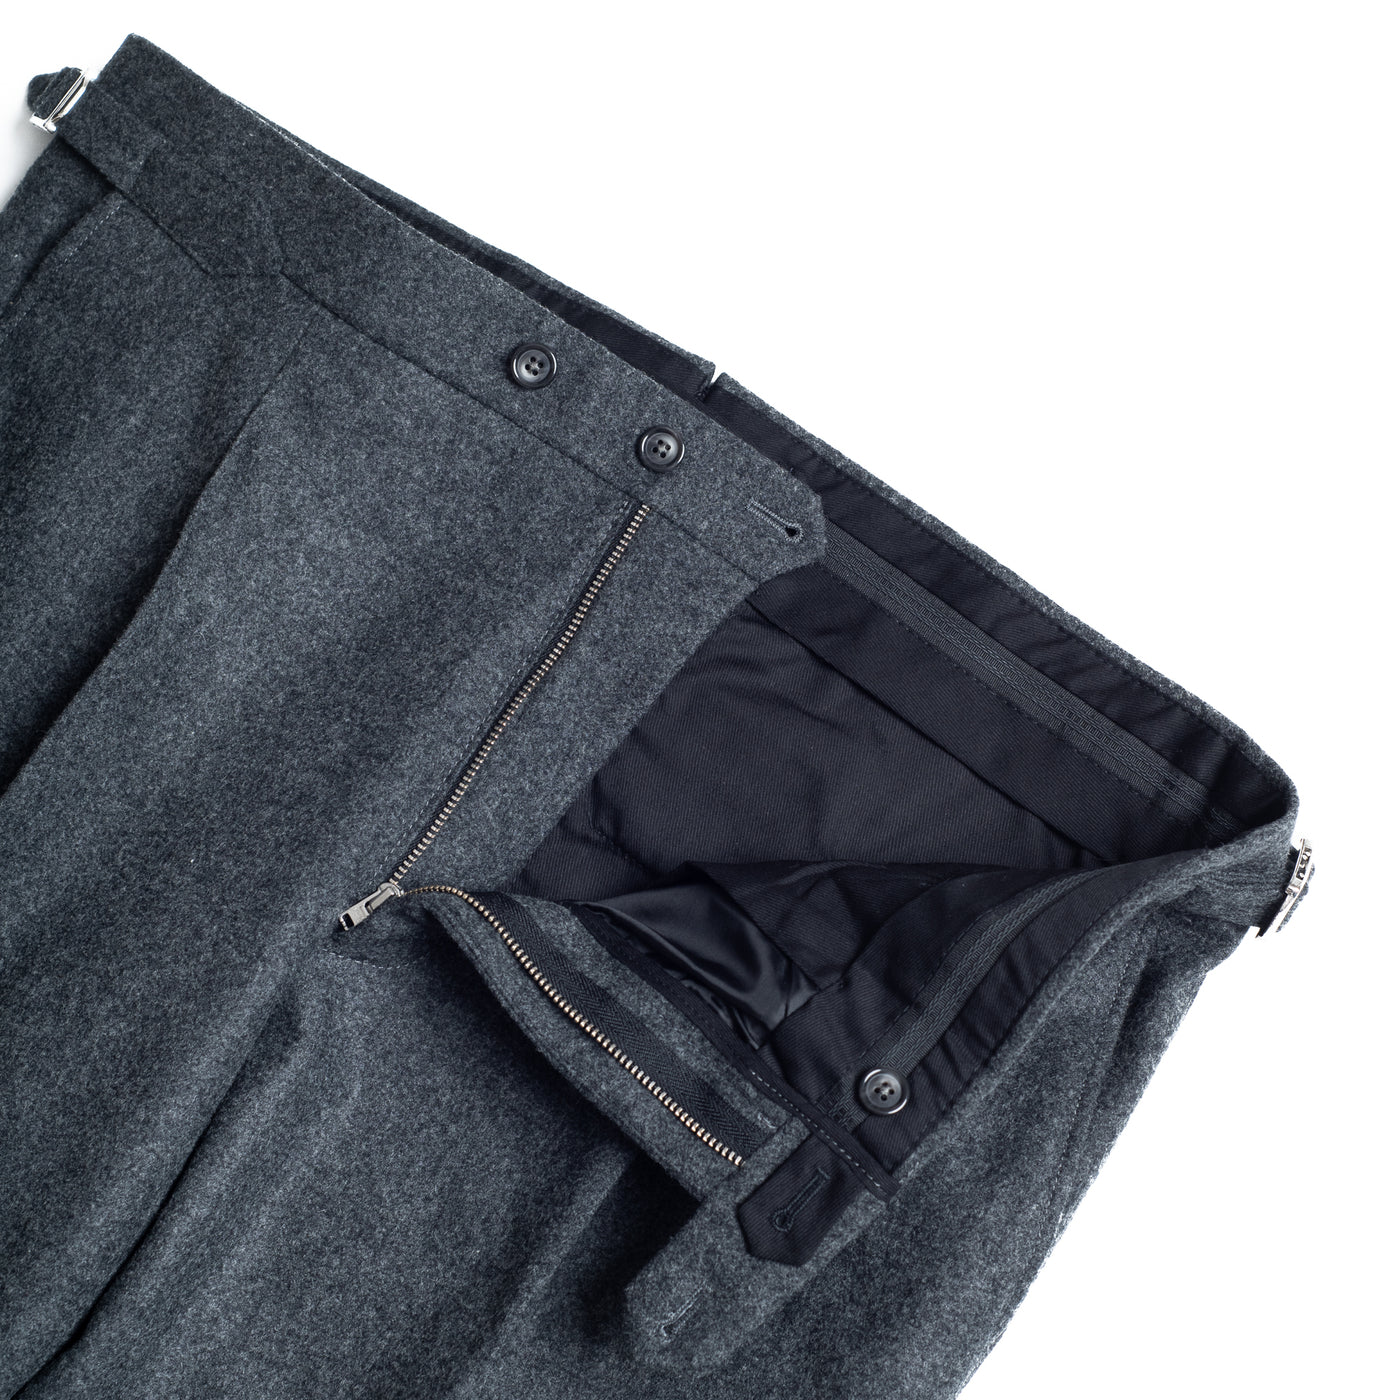 Light grey Flannel Trousers Soragna Capsule Collection  Made in Italy   Pini Parma